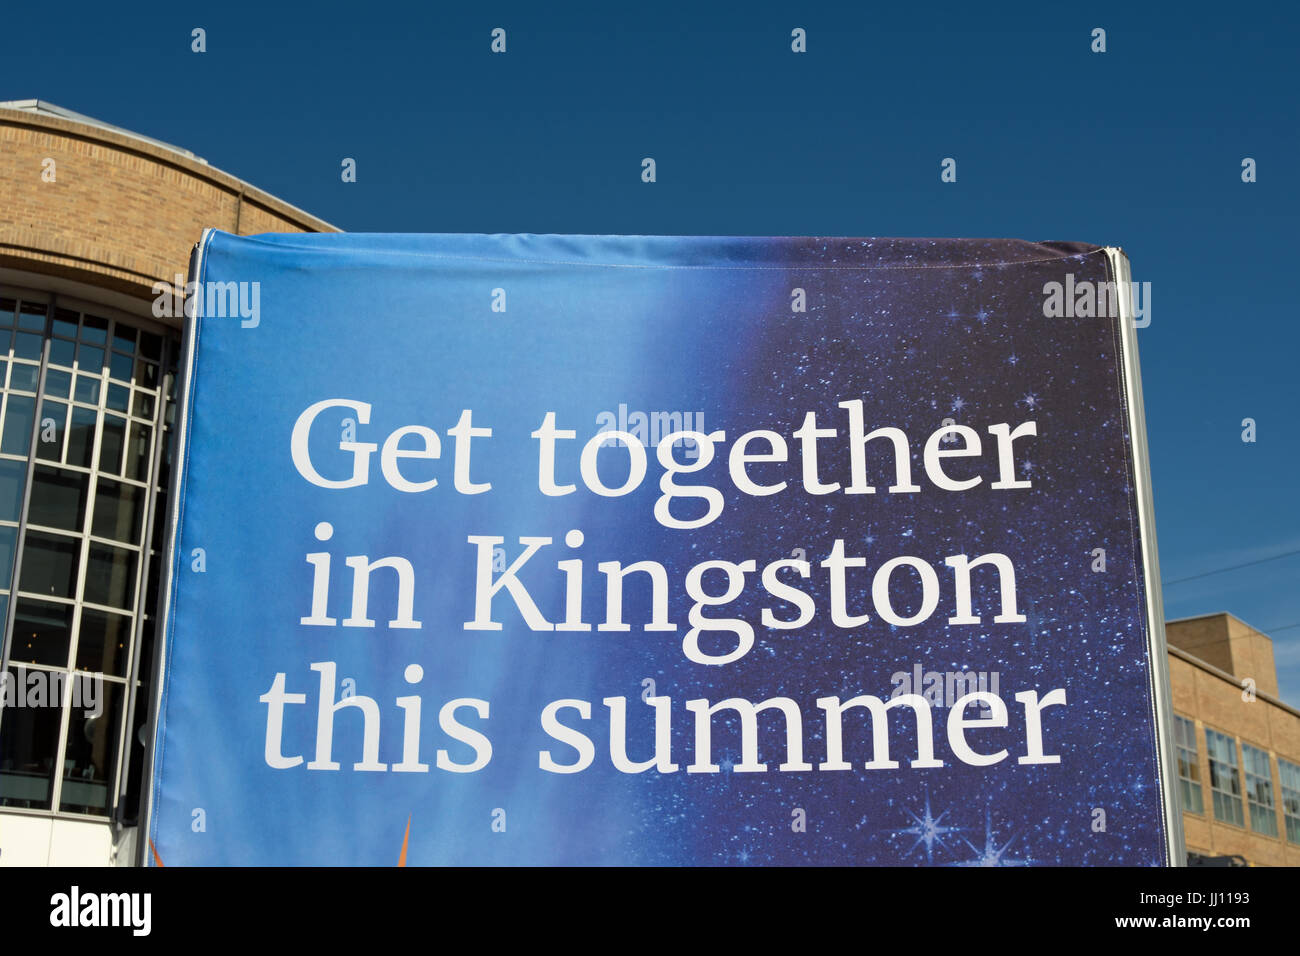 get together in kingston this summer, promotional sign to encourage tourism and local activities in kingston upon thames, surrey, england Stock Photo